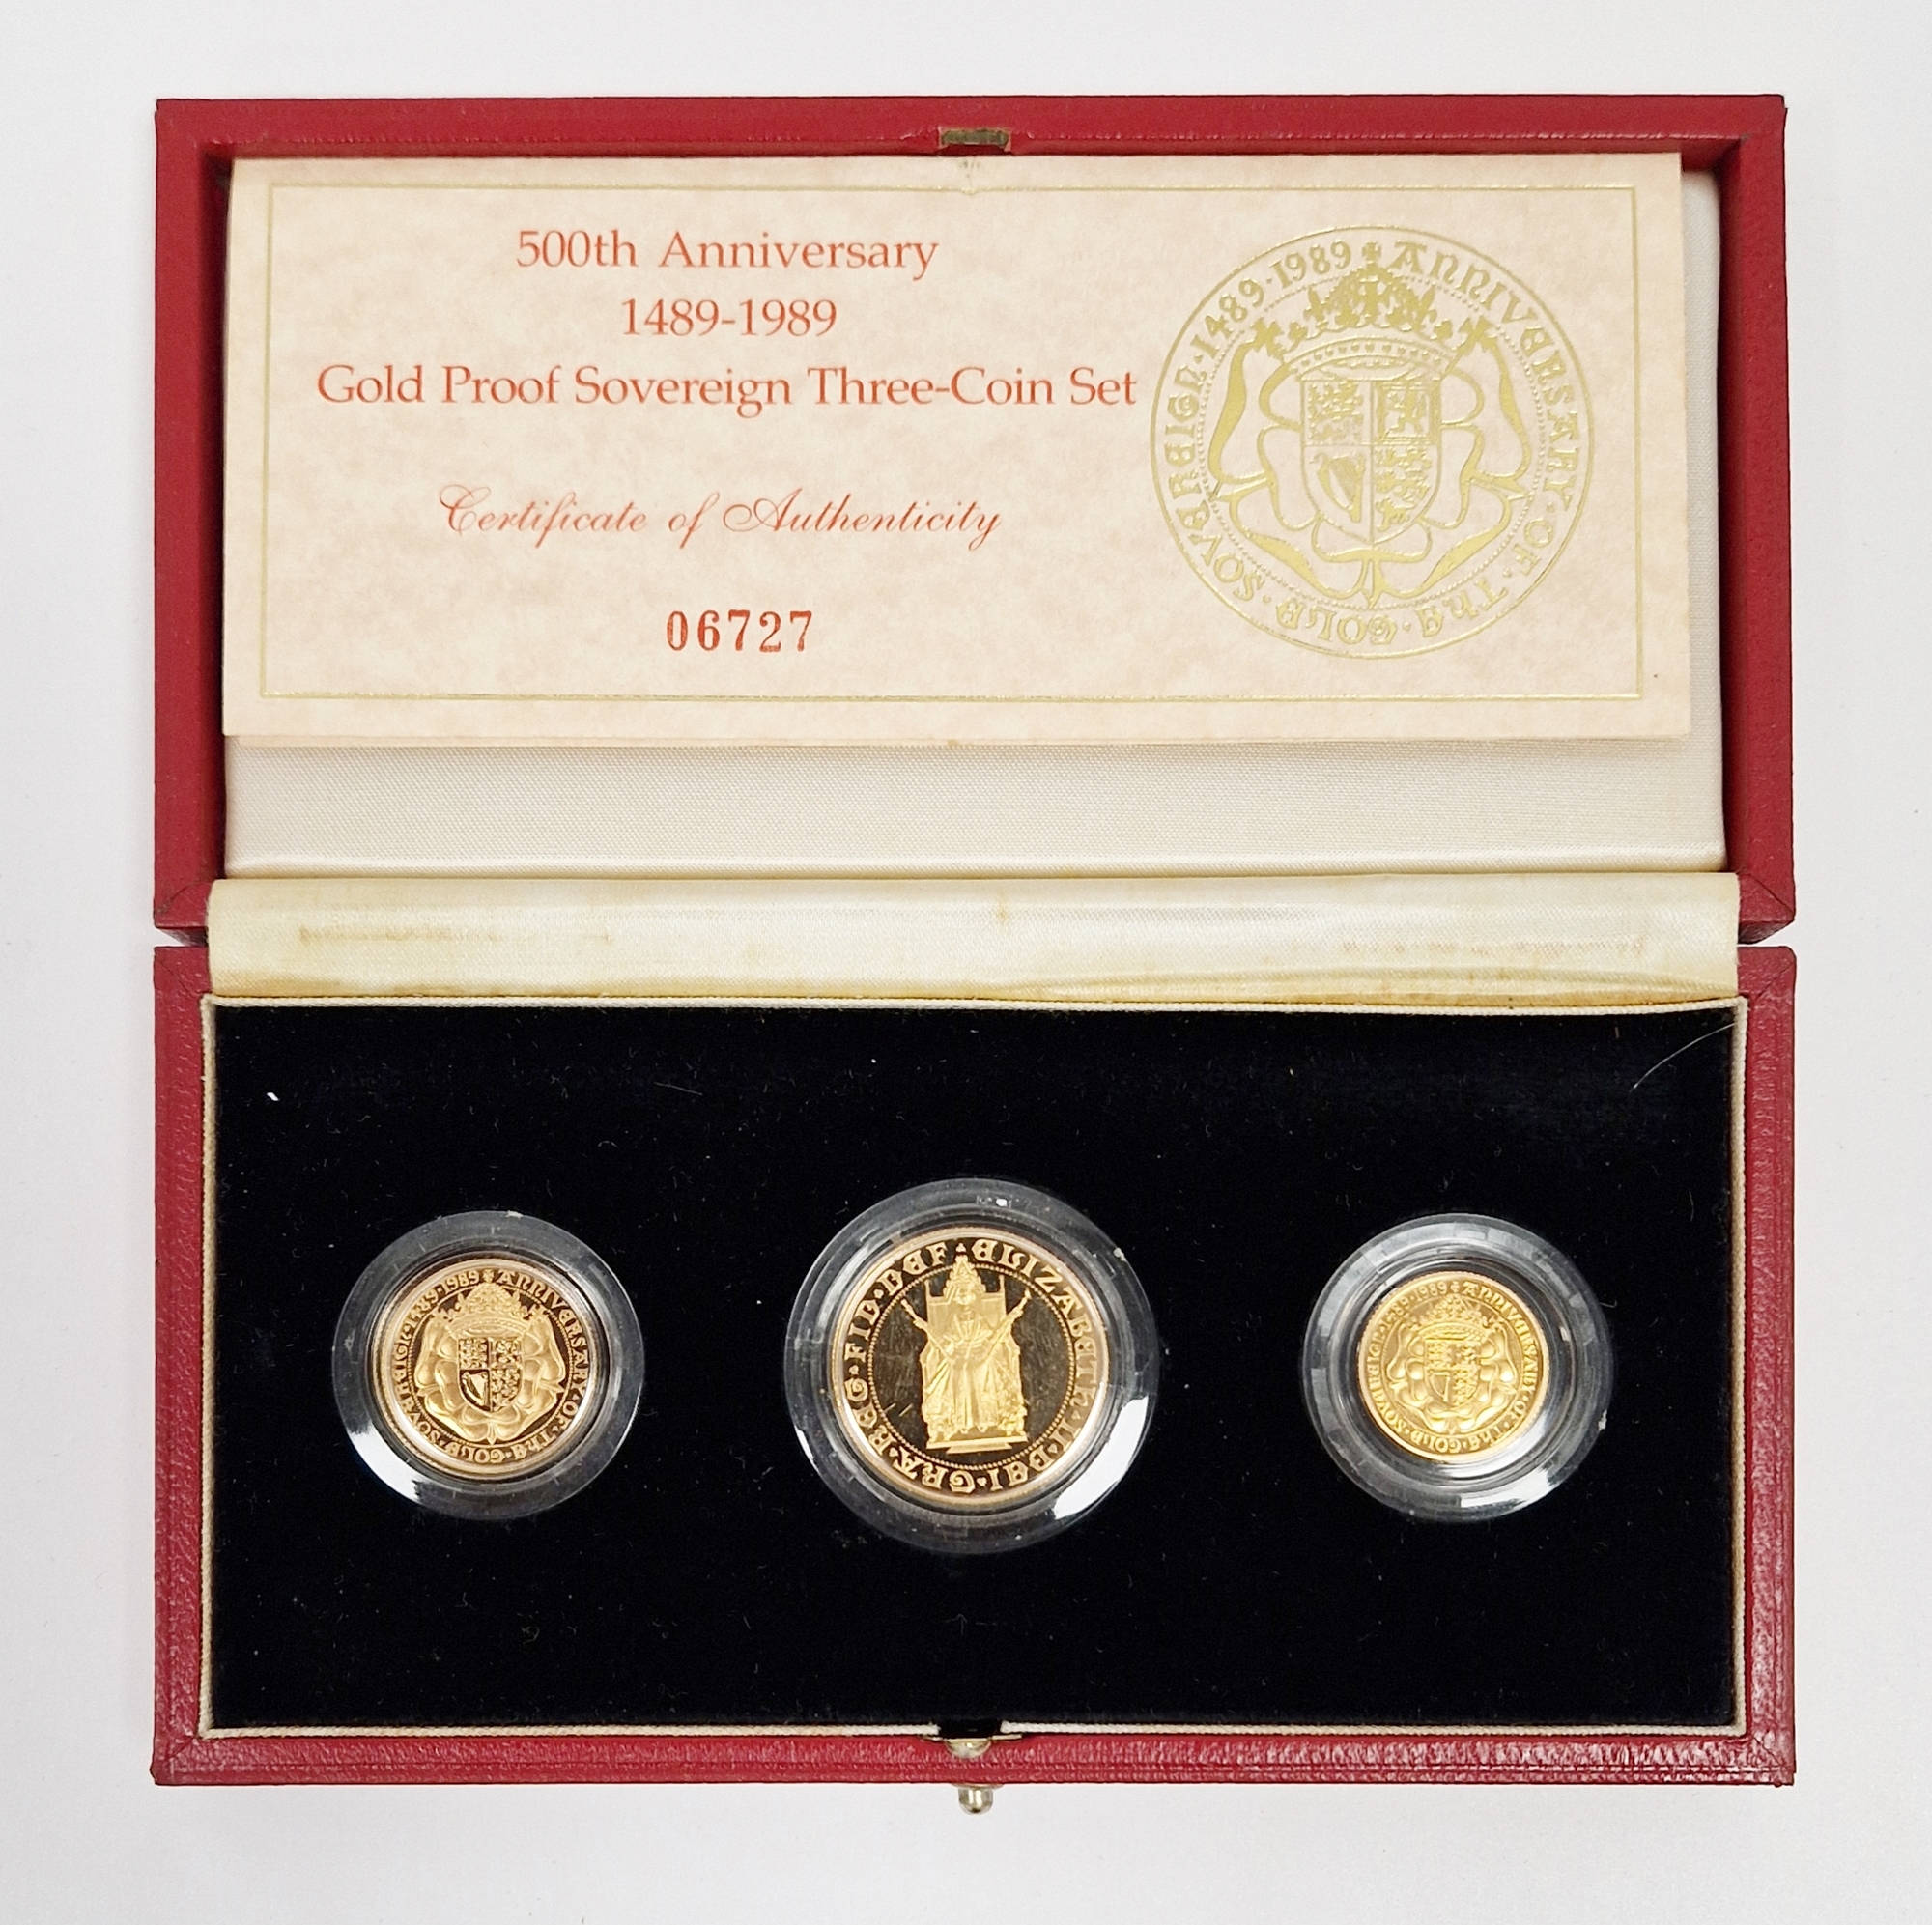 LOT WITHDRAWN 500th anniversary gold proof sovereign three coin set, 1489-1989, double sovereign